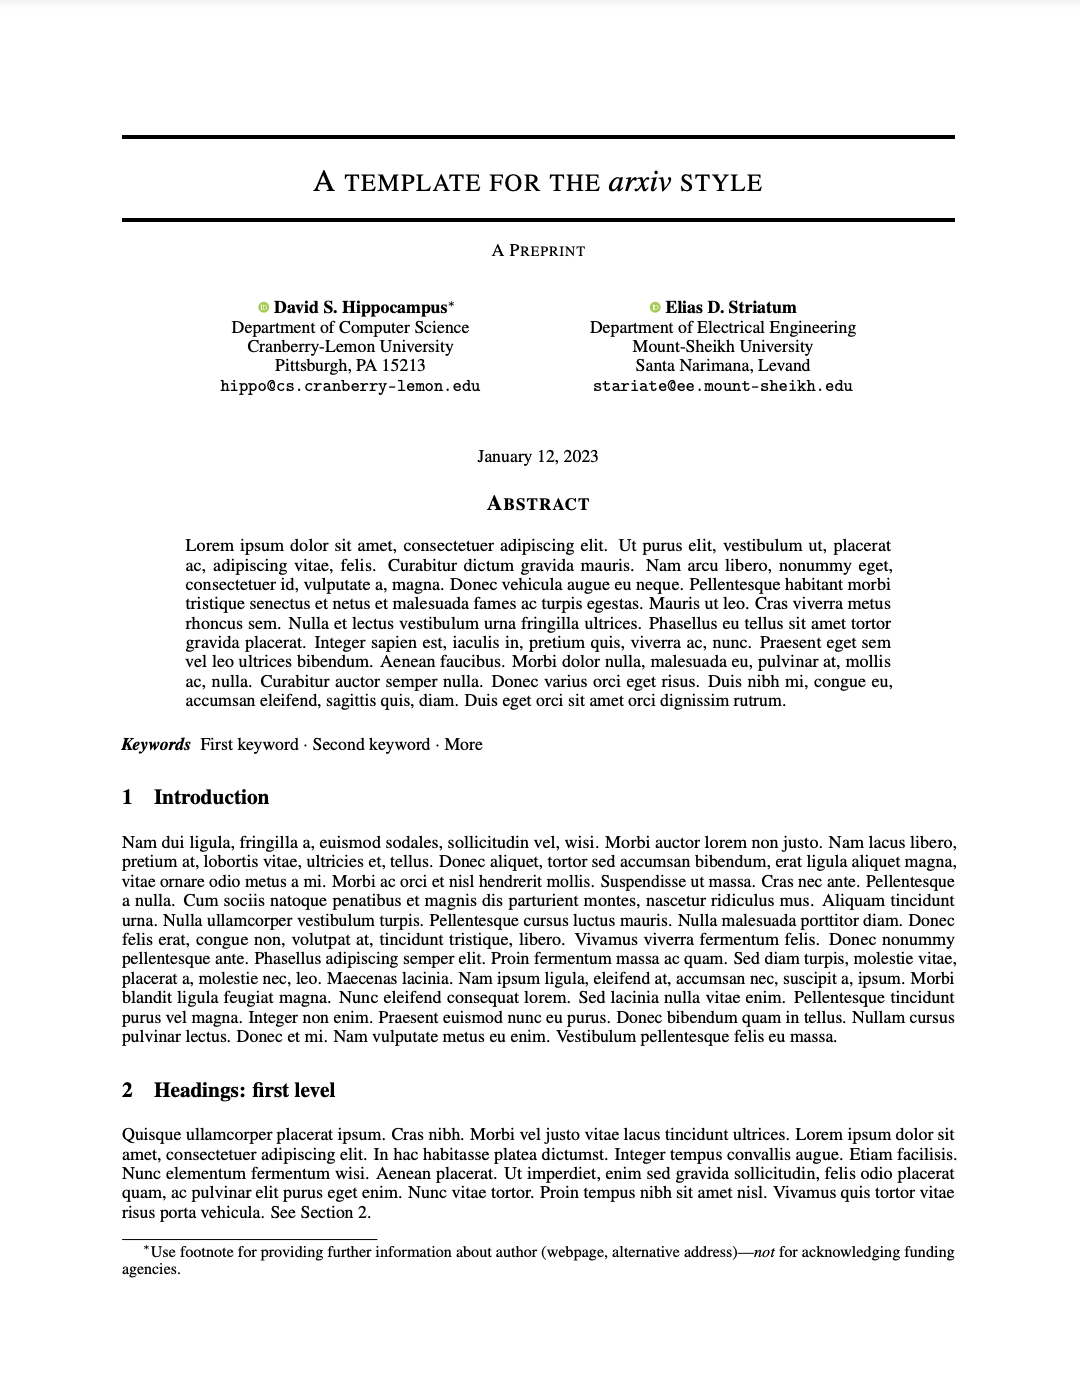 A template for the arxiv style